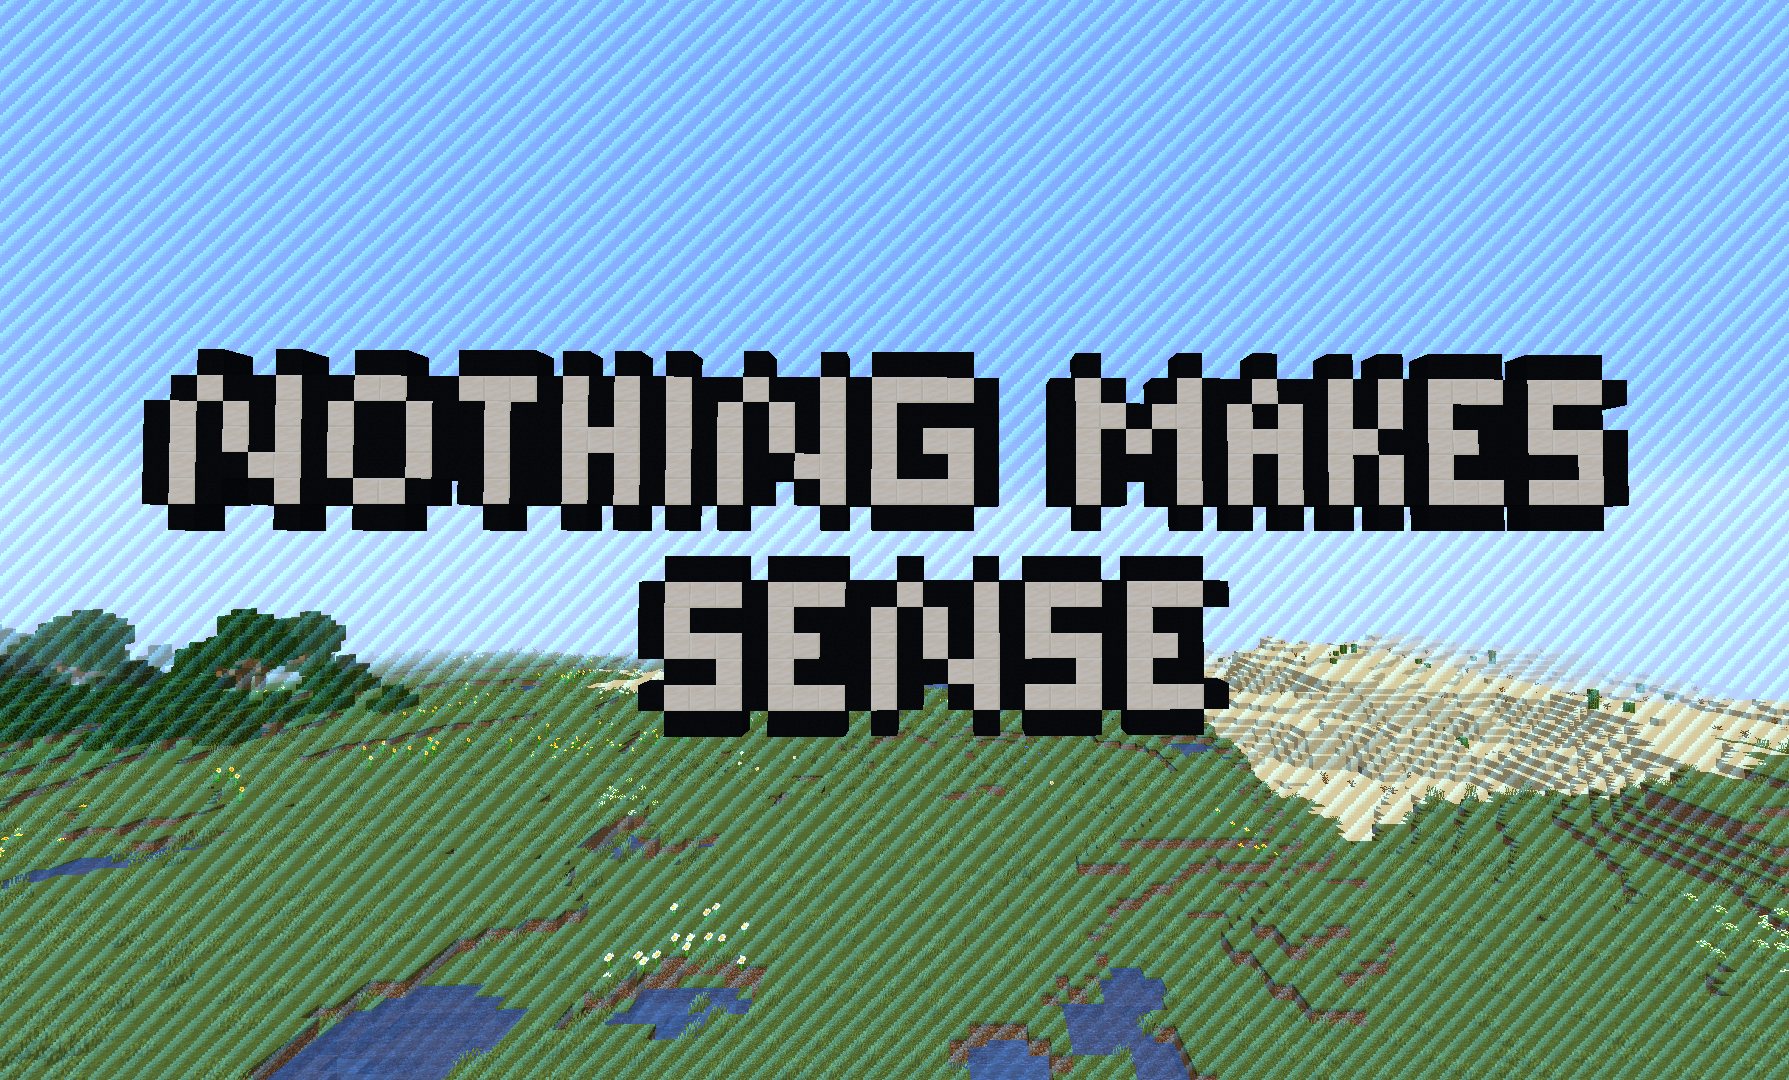 Download Nothing Makes Sense for Minecraft 1.15.1